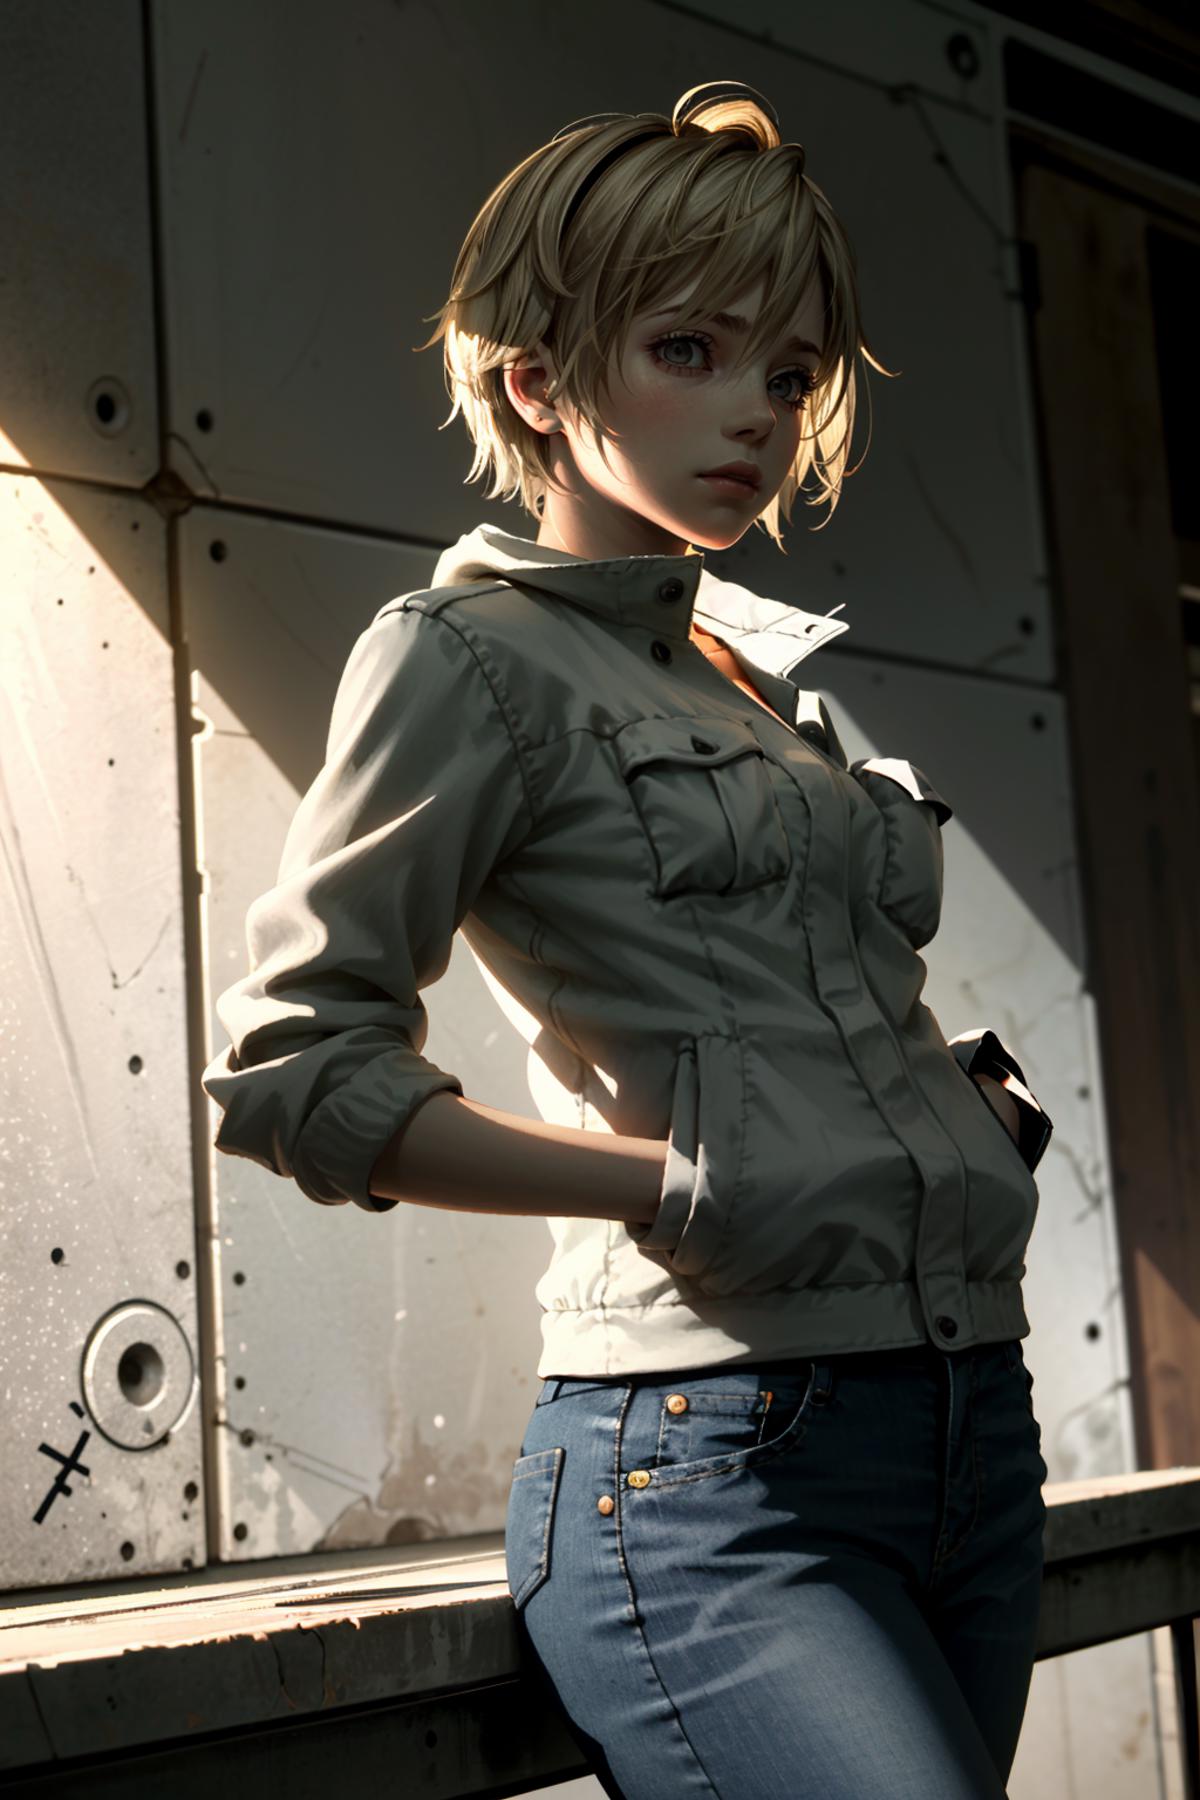 Heather Mason from Silent Hill 3 image by BloodRedKittie